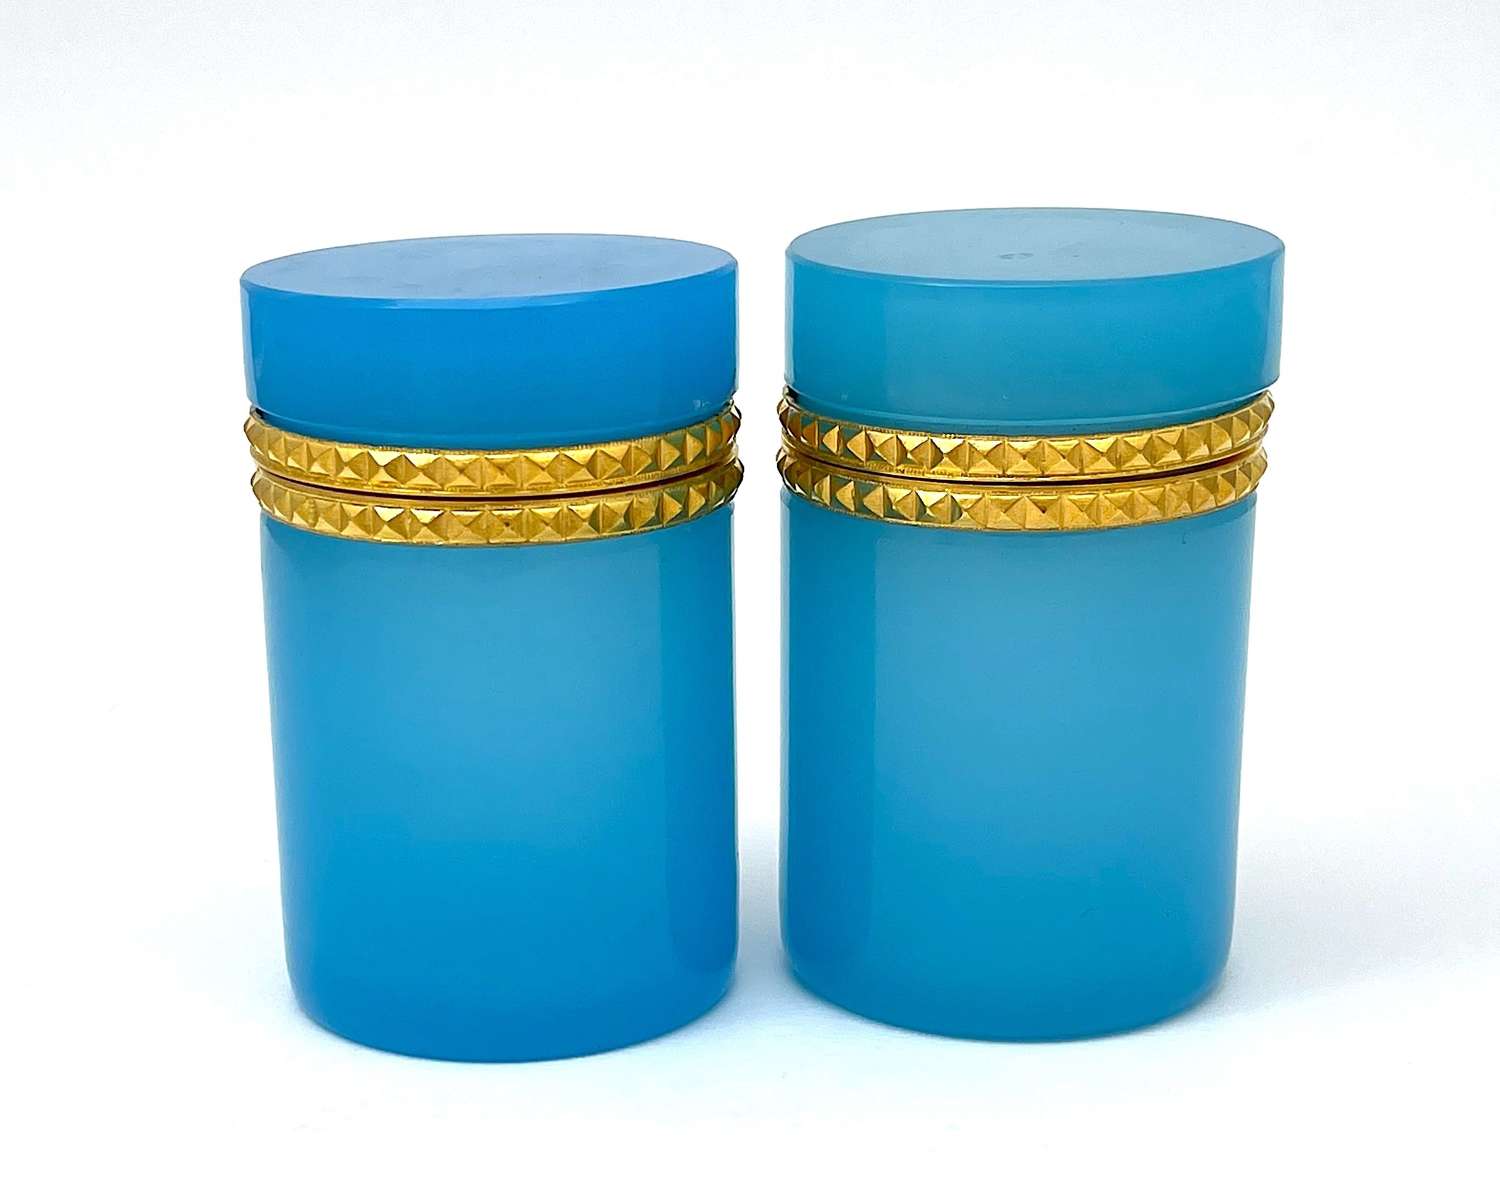 Pair of Antique Blue Opaline Glass Cylindrical Caskets Boxes